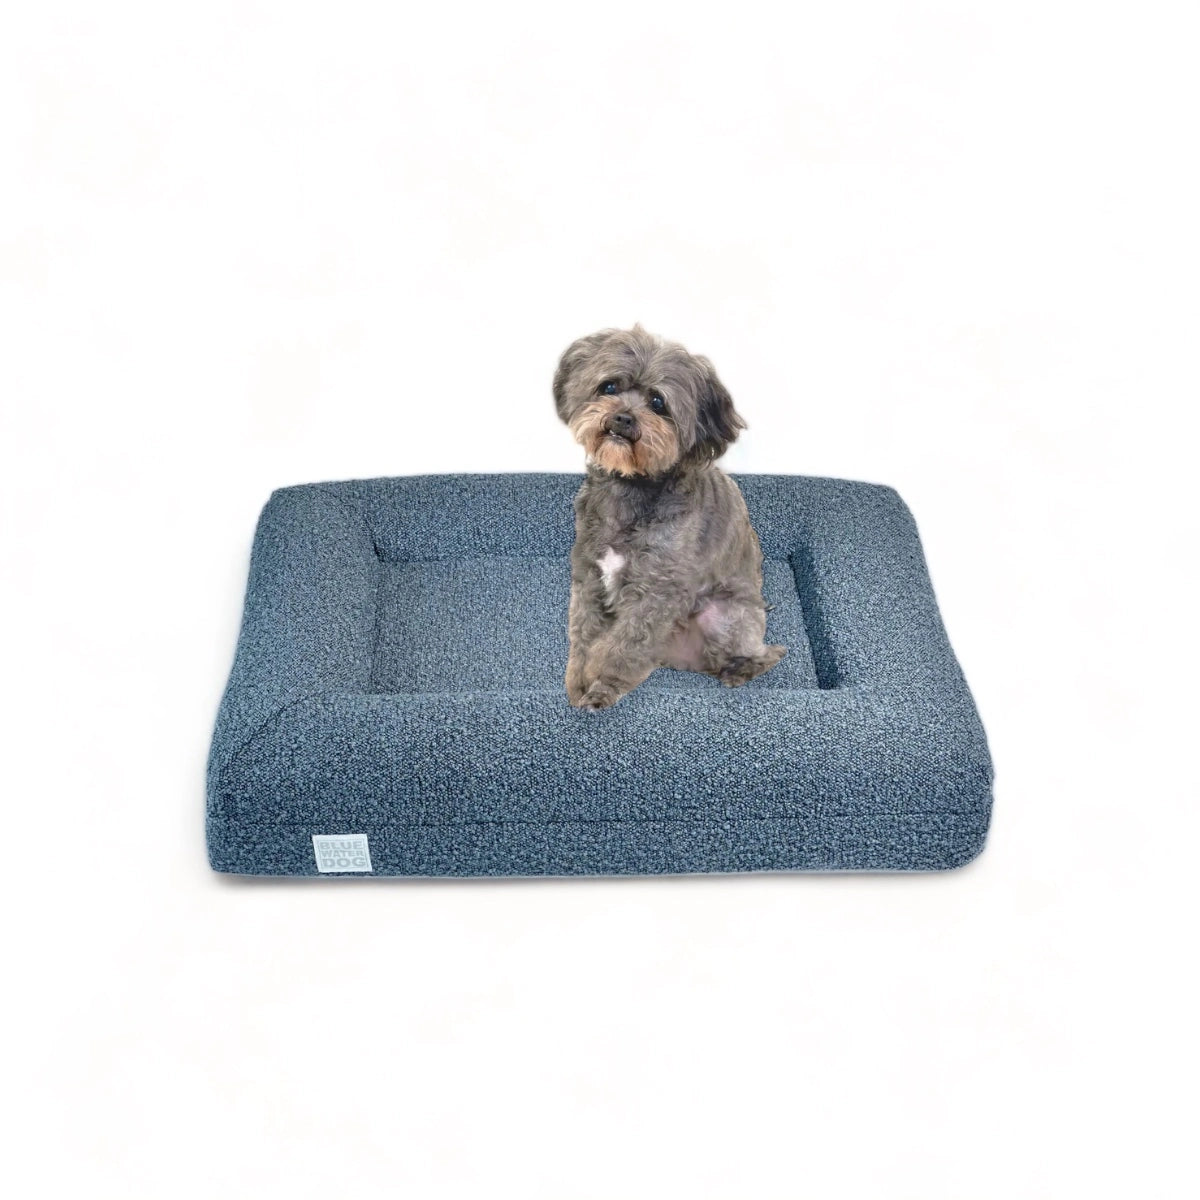 Shihpoo sitting on a small, blue-colored orthopedic memory foam boucle dog bed